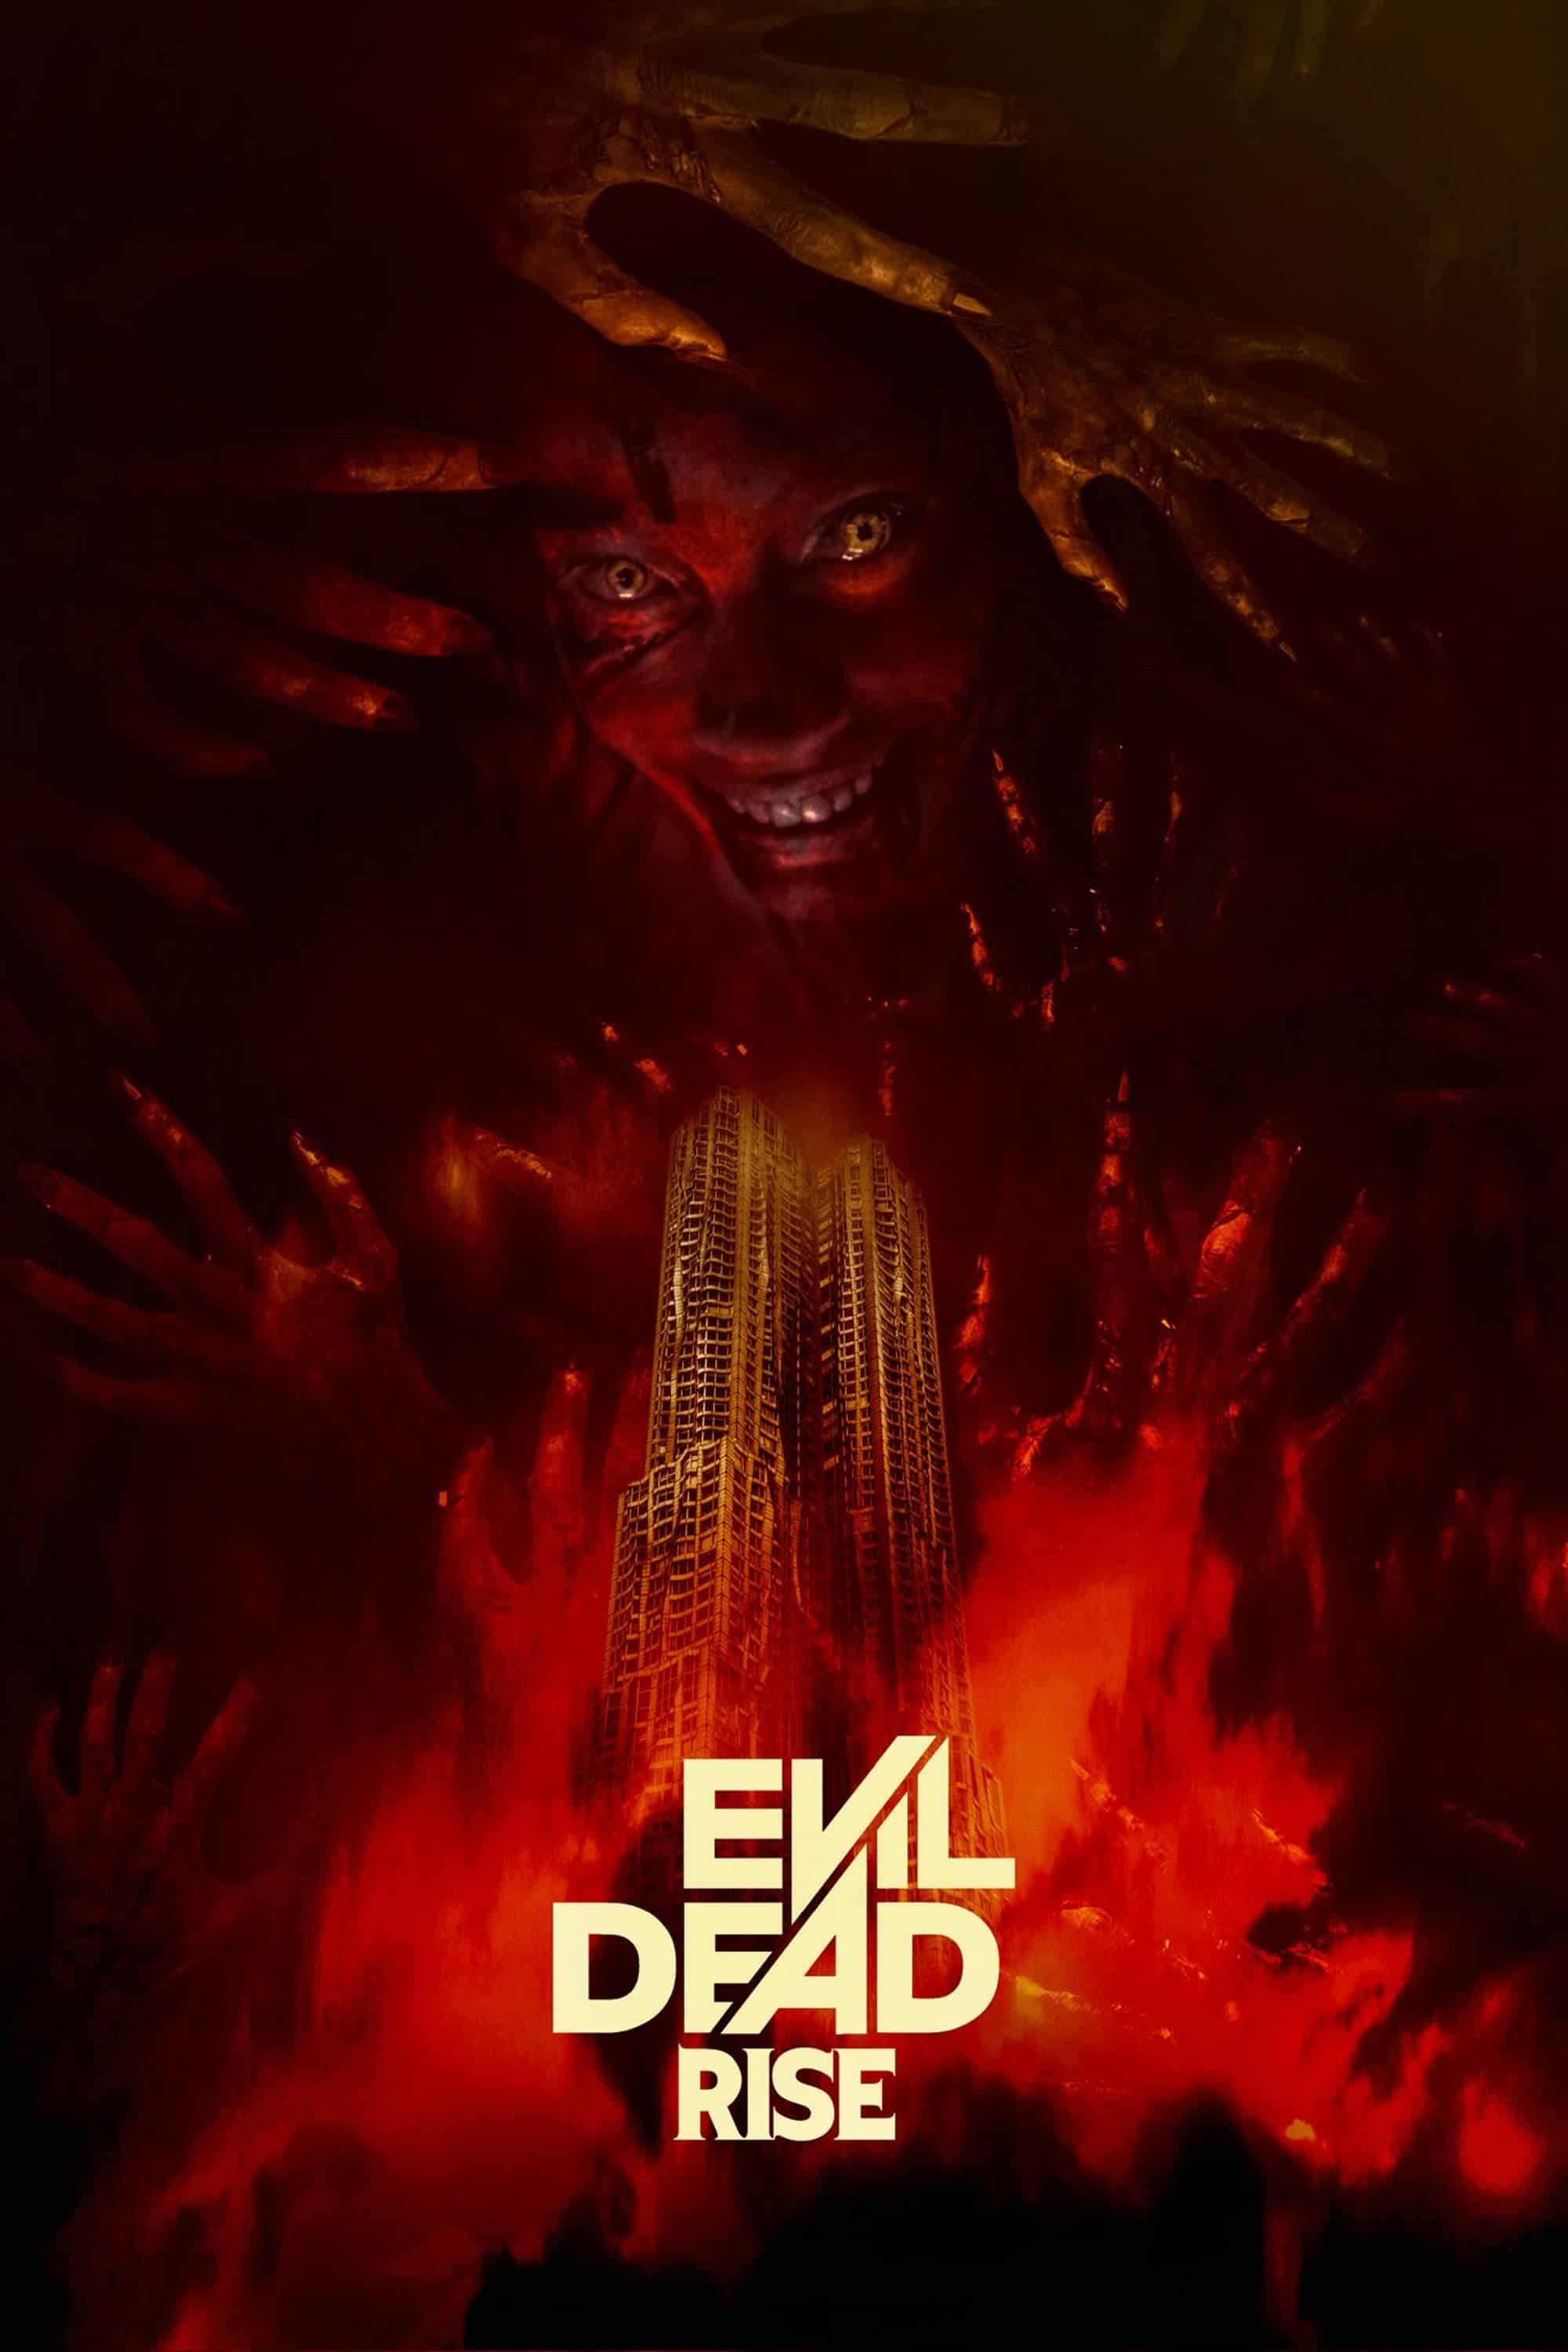 Evil Dead Rise: Plot, Cast, and Everything Else We Know